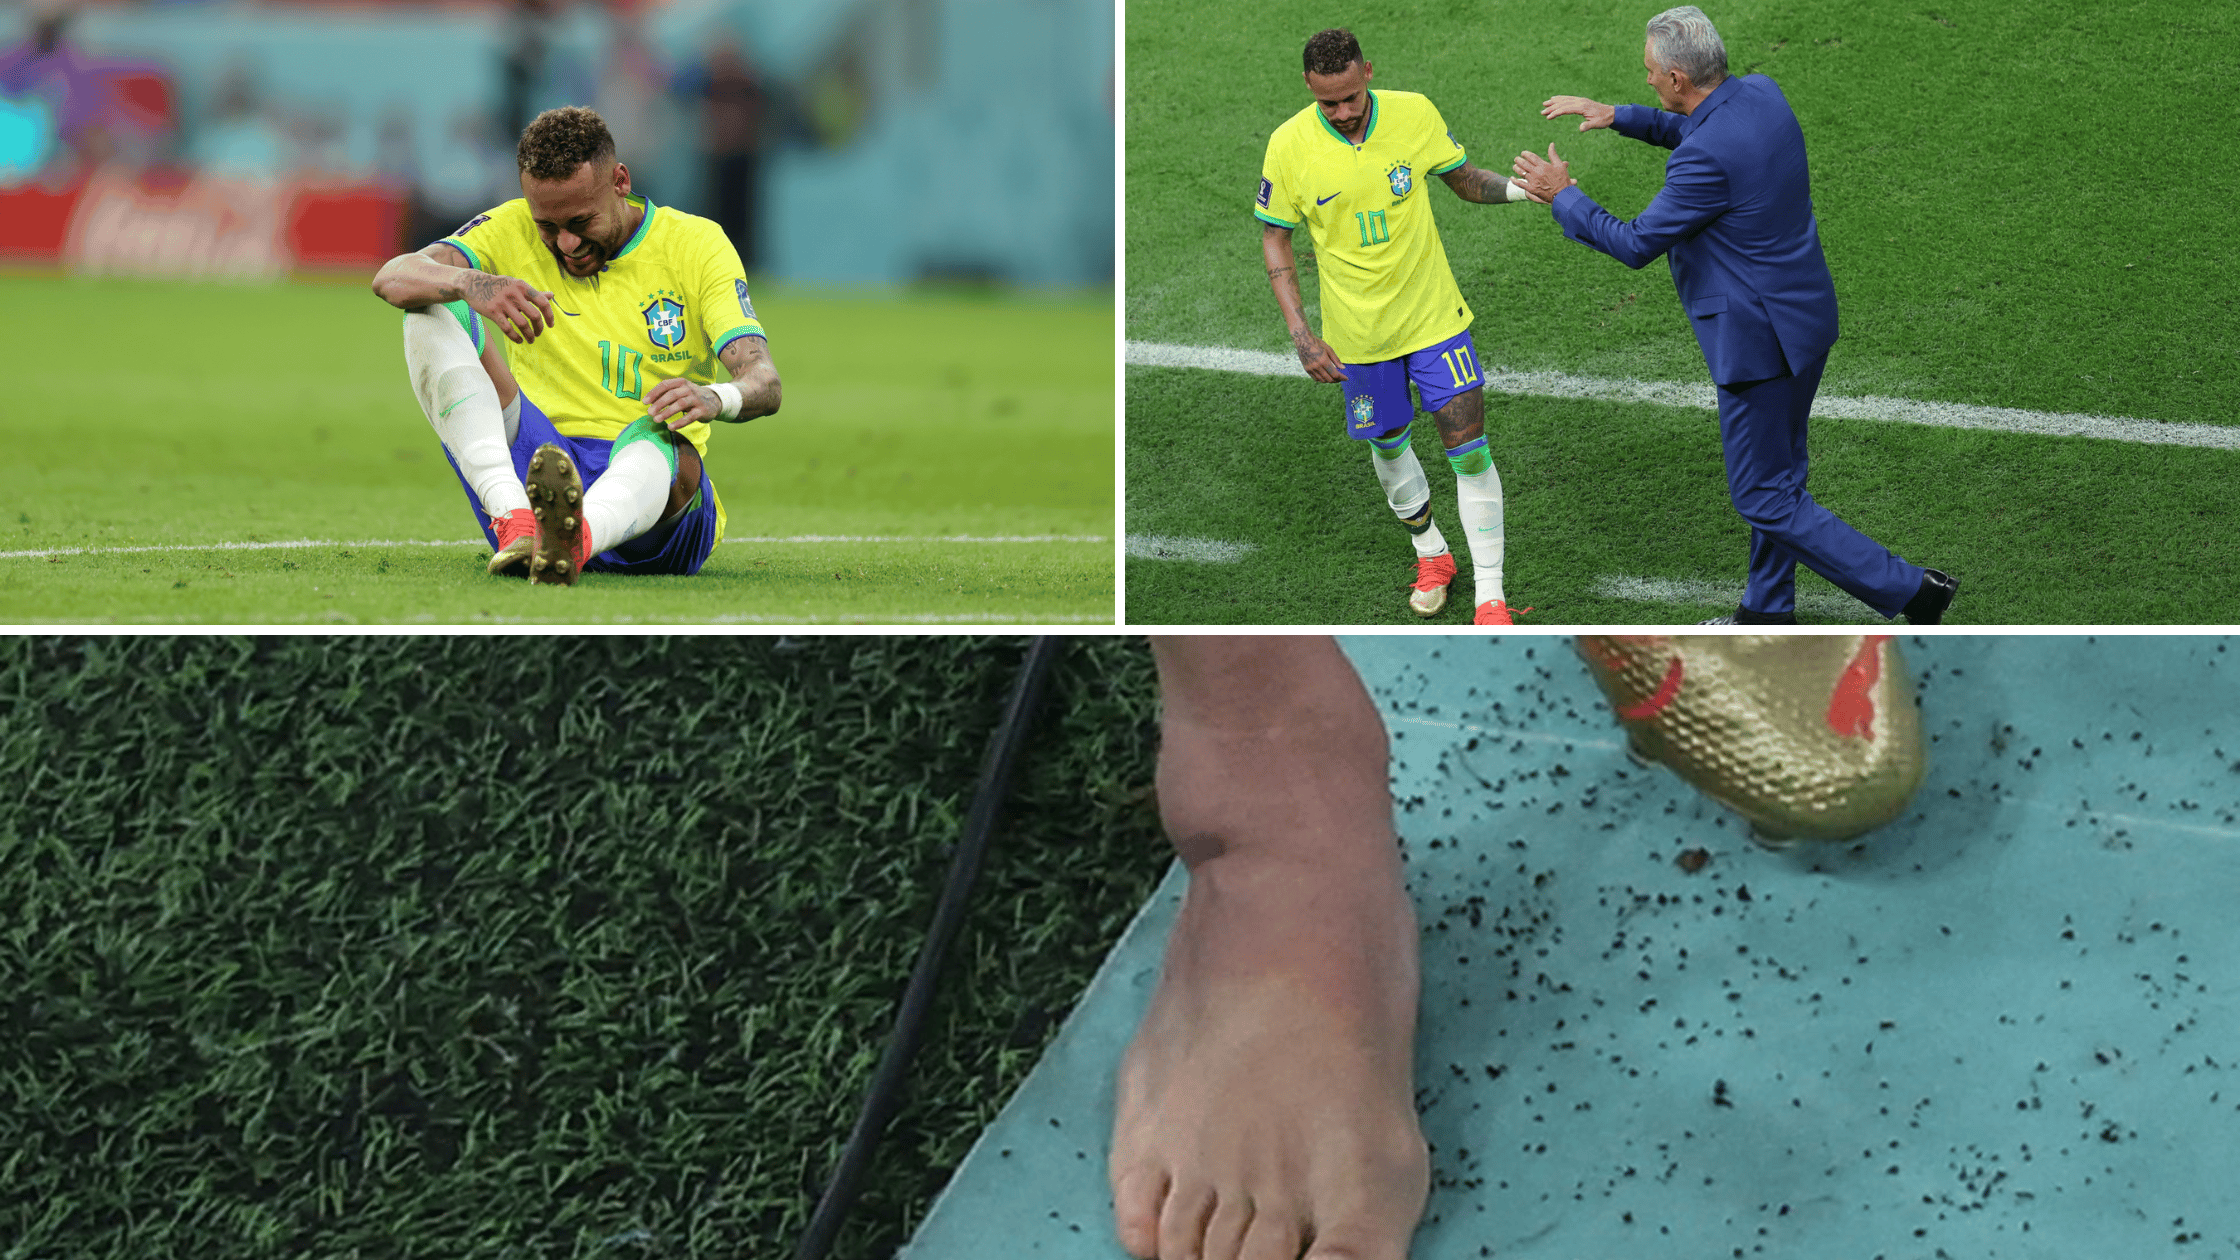 Neyamr's Injury may be big blow for Brazil